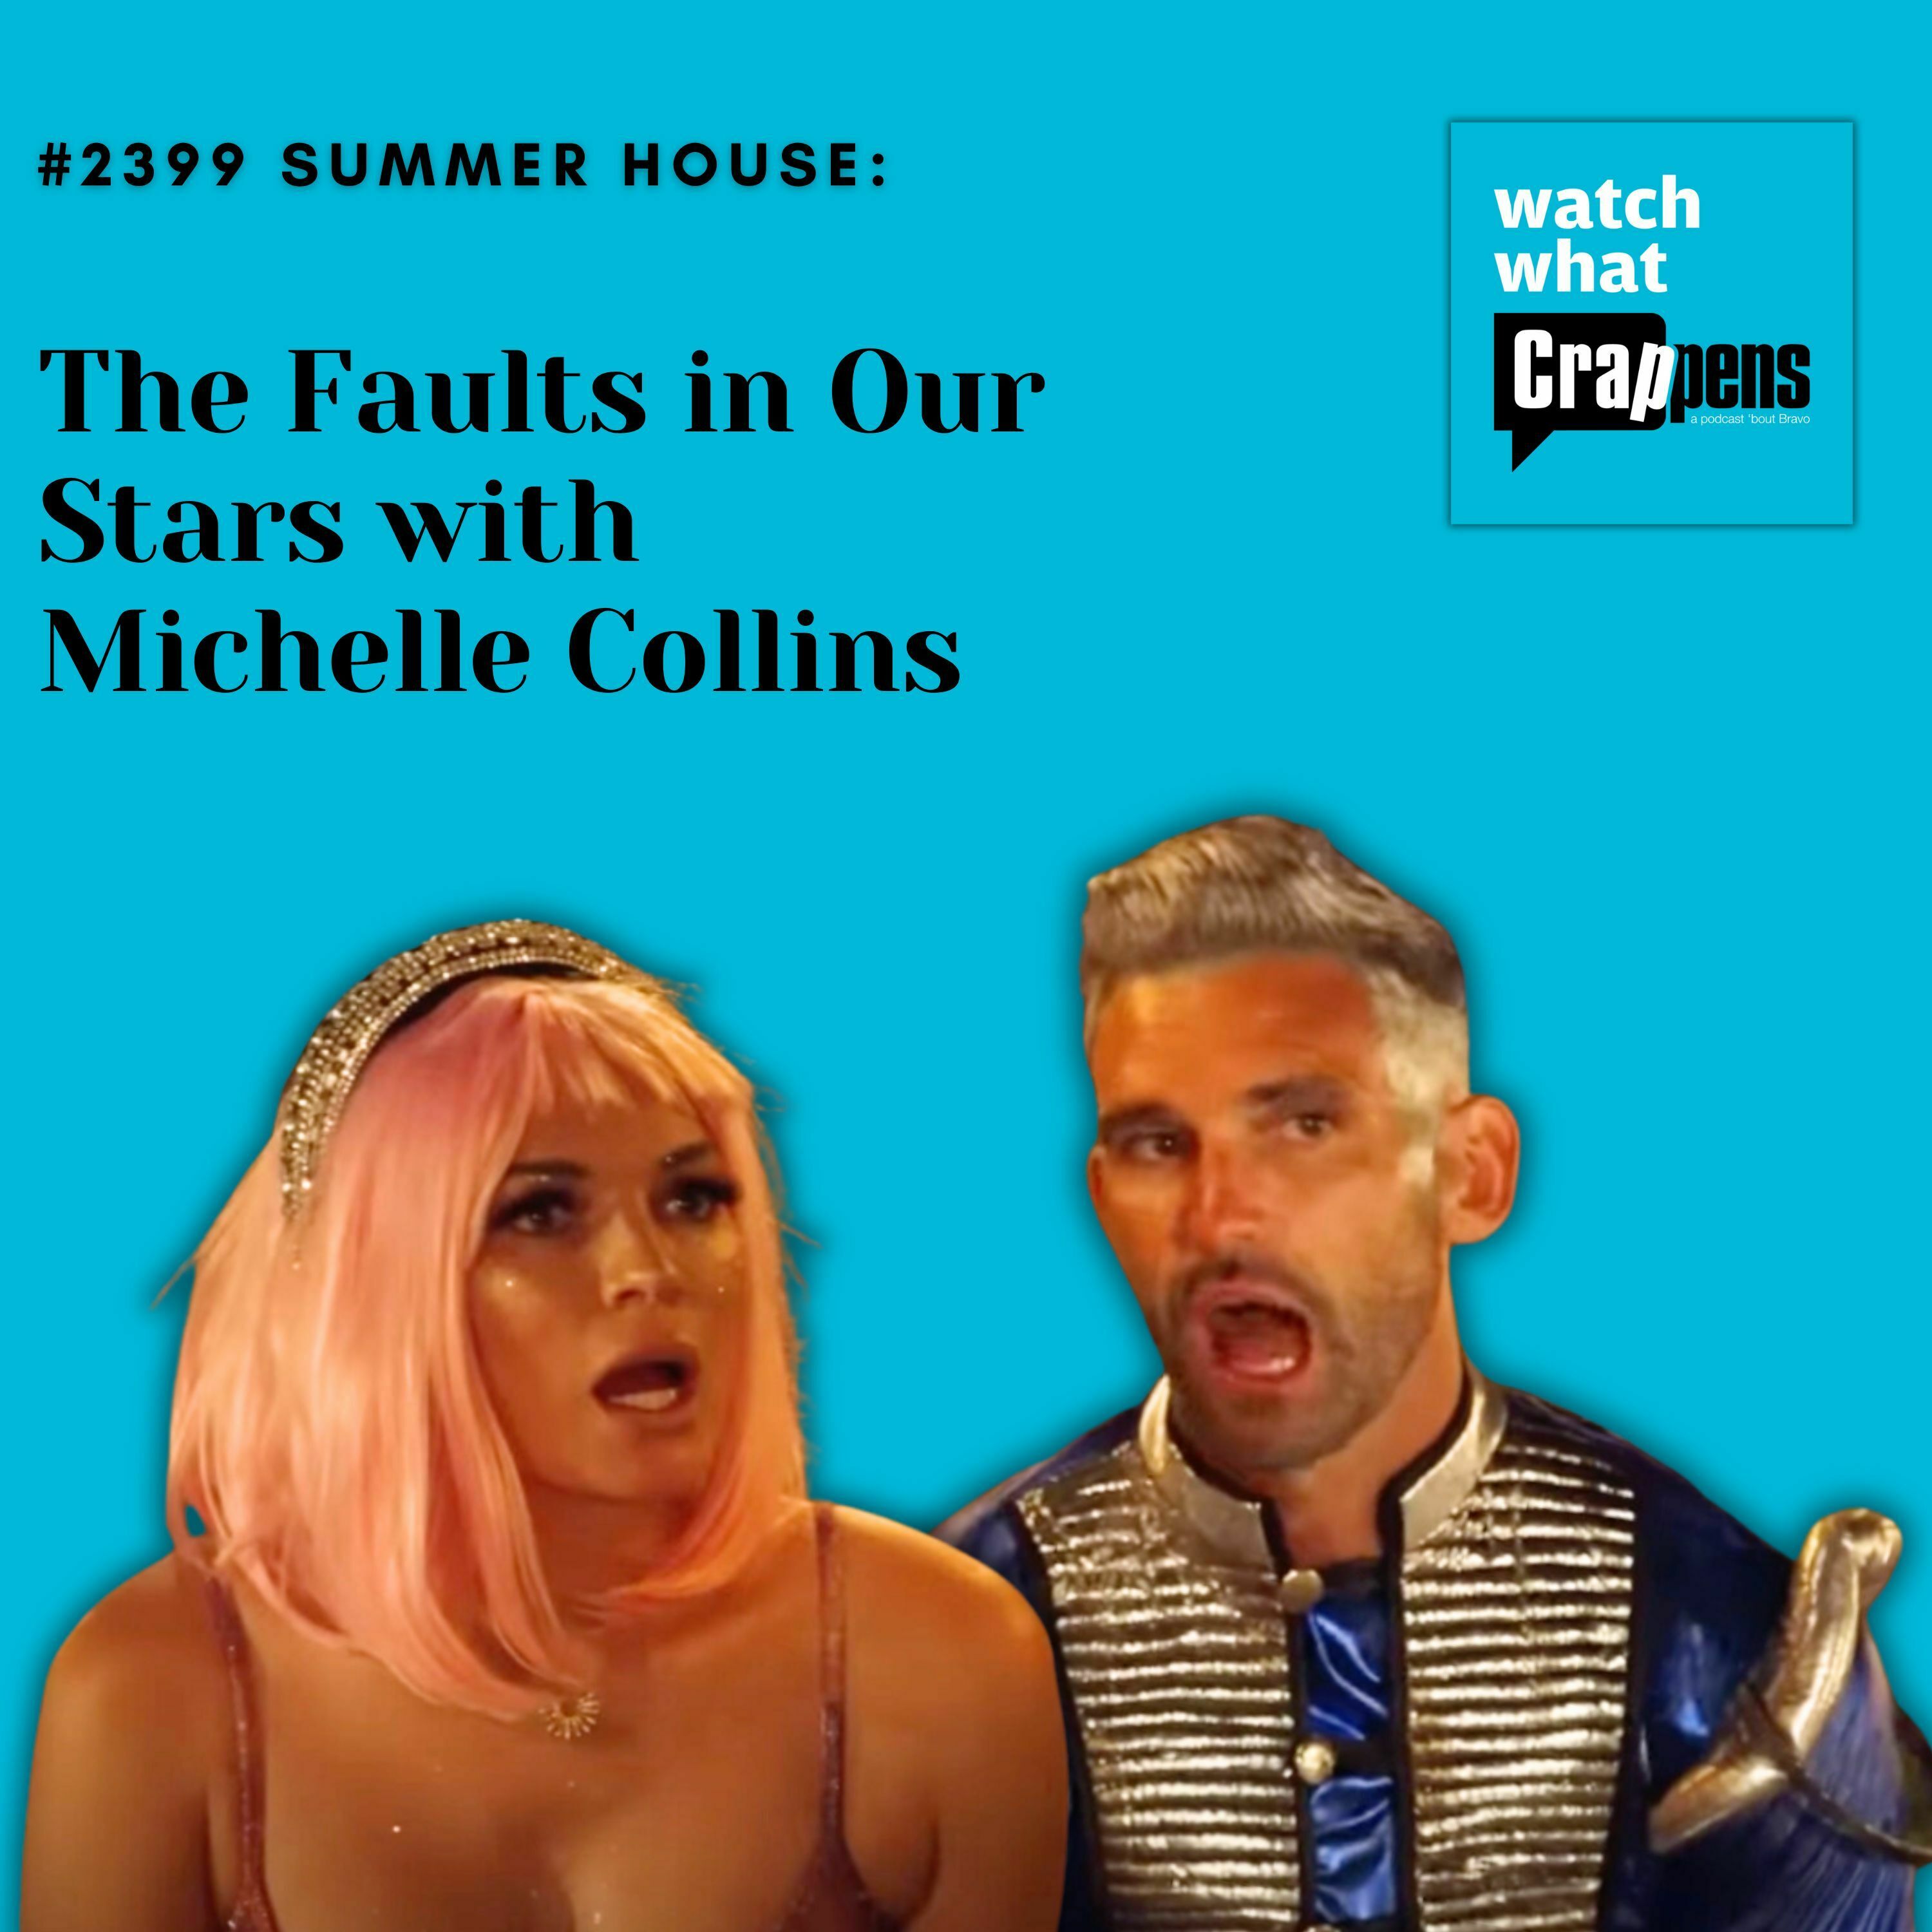 #2399 Summer House: The Faults in Our Stars with Michelle Collins